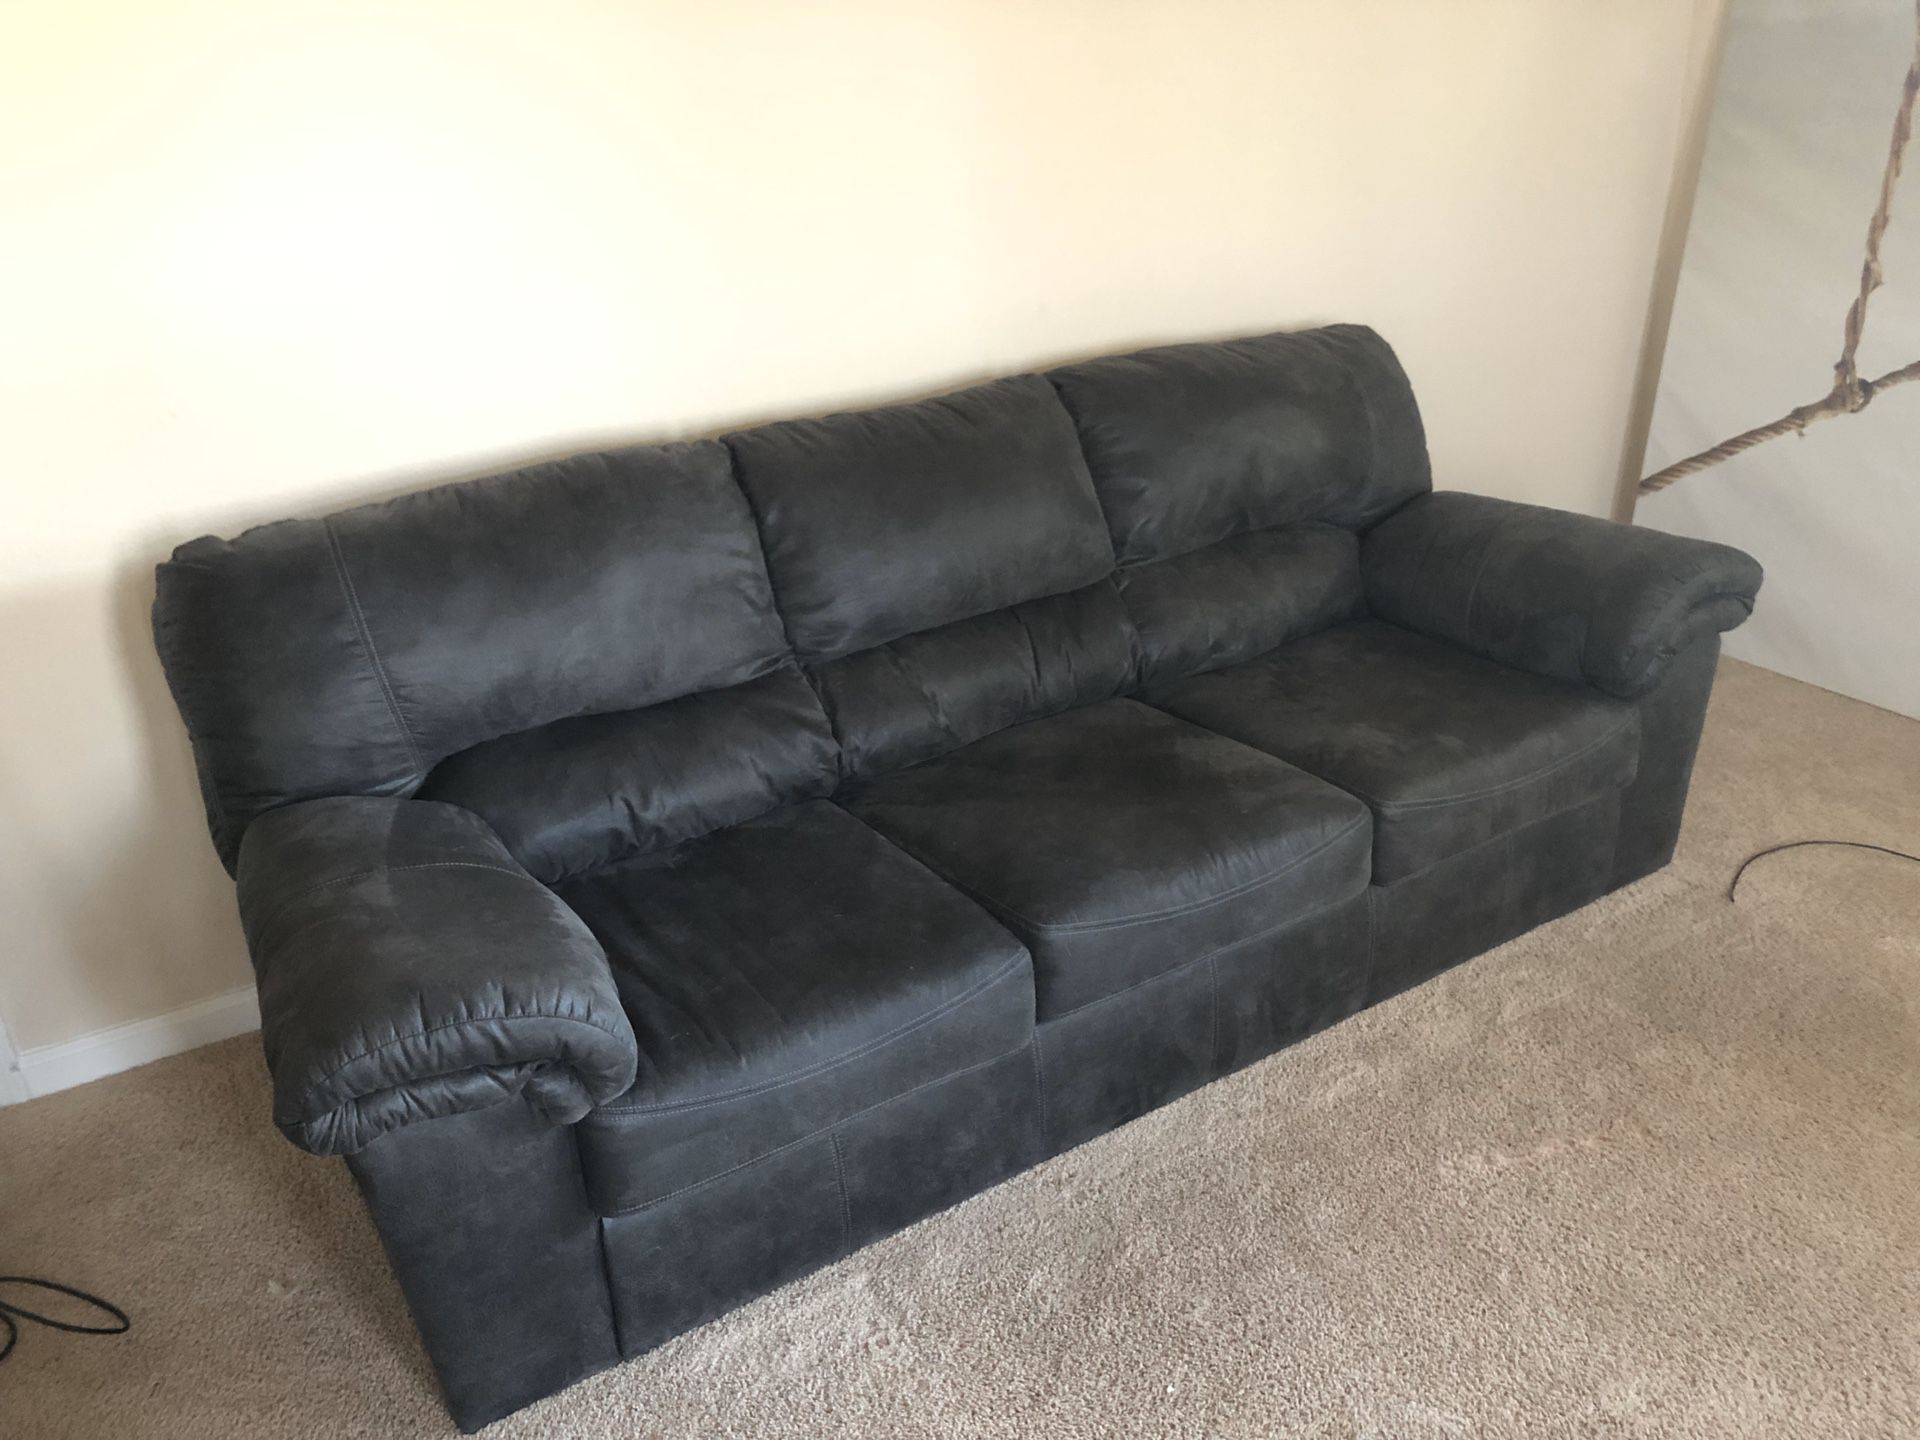 Bladen Full Sofa Sleeper Moving and can't bring it with. $400 OBO. {contact info removed}